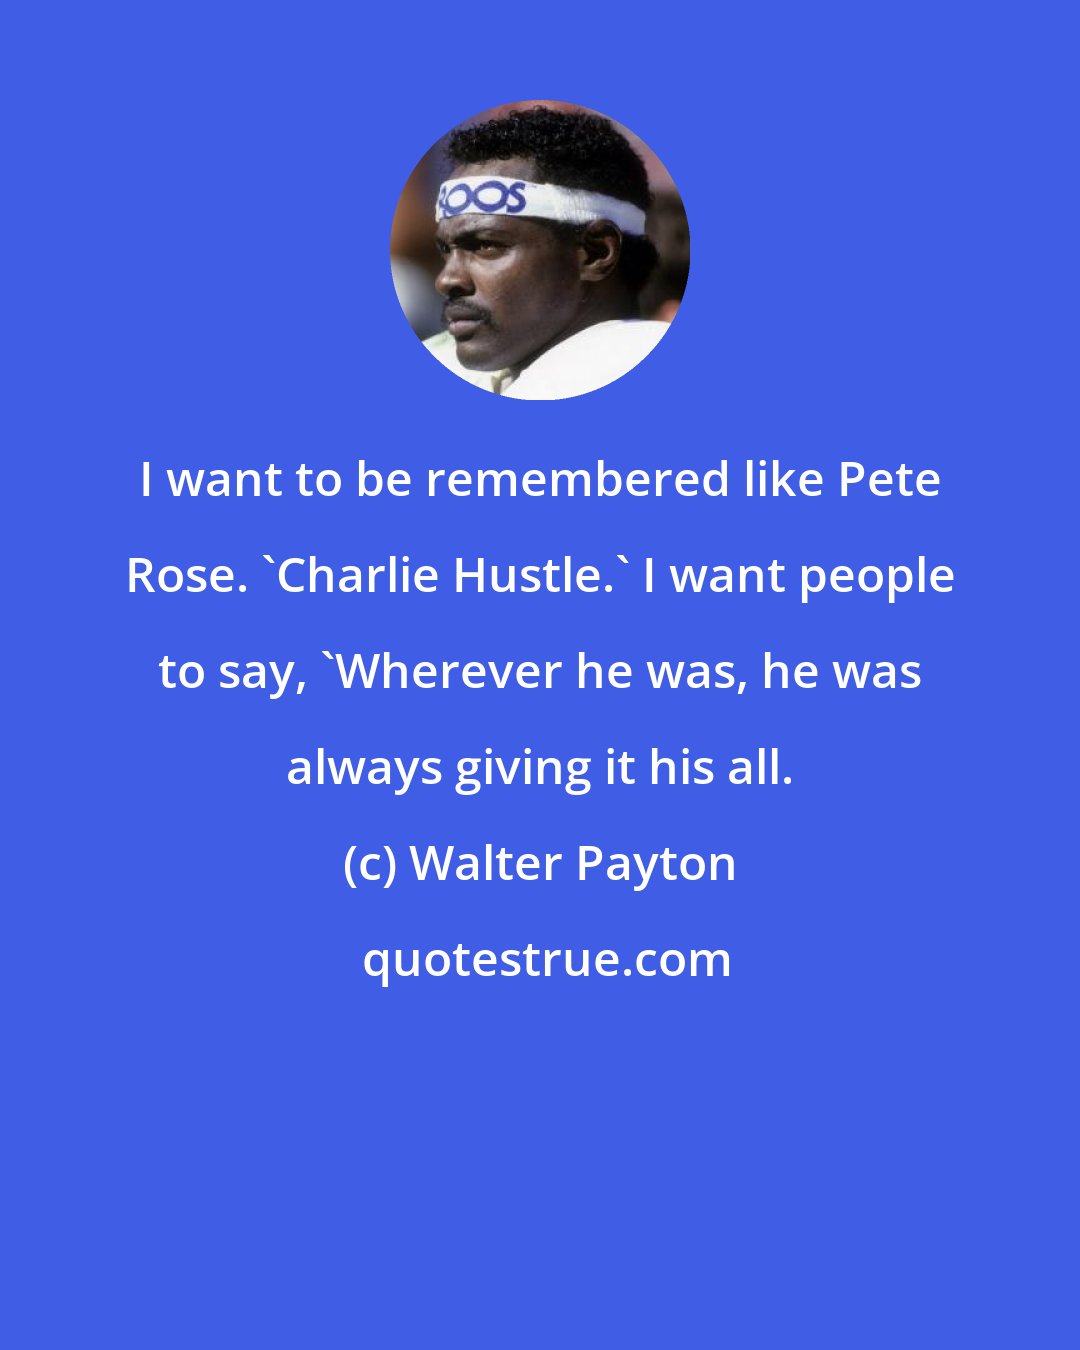 Walter Payton: I want to be remembered like Pete Rose. 'Charlie Hustle.' I want people to say, 'Wherever he was, he was always giving it his all.